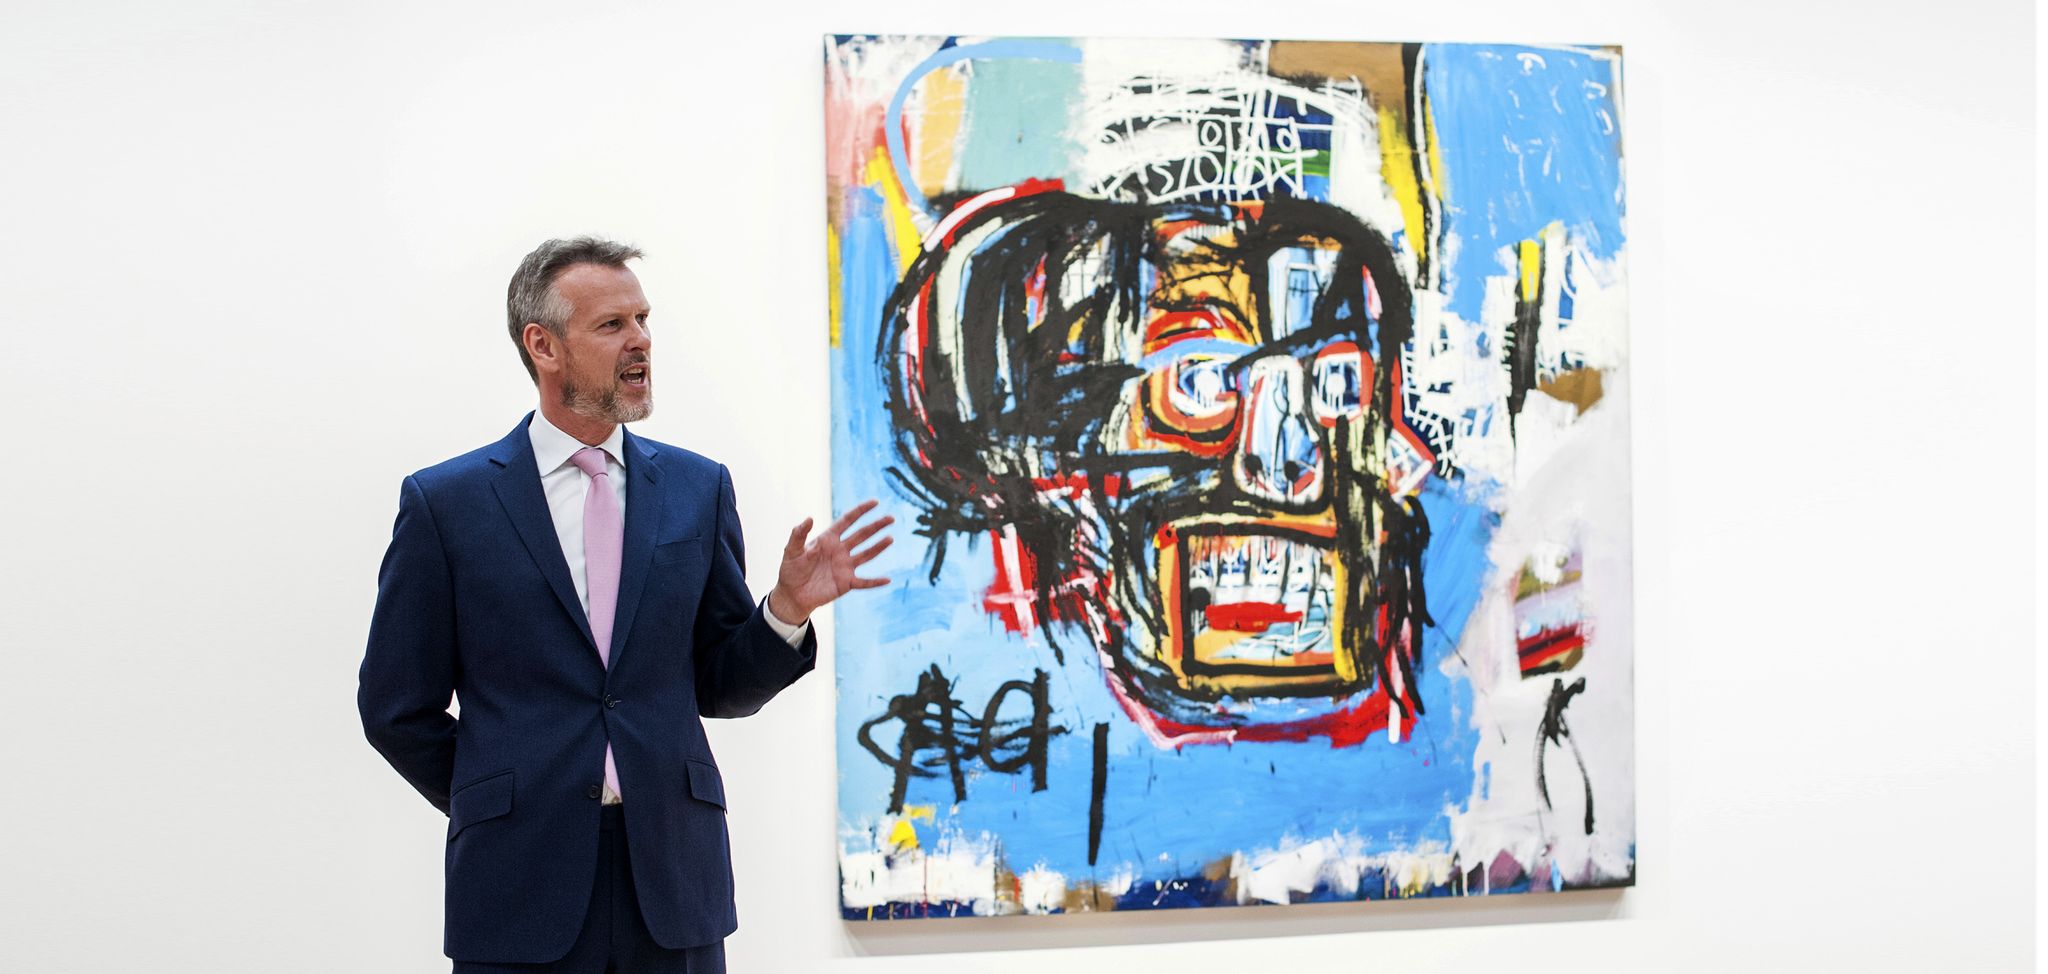 jean michel basquiat's 1982 painting "untitled" sold for 1105 million at sotheby's in new york on thursday, may 18, 2017, to become the sixth most expensive work ever sold at auction only 10 other works have broken the 100 million marksipa via ap images